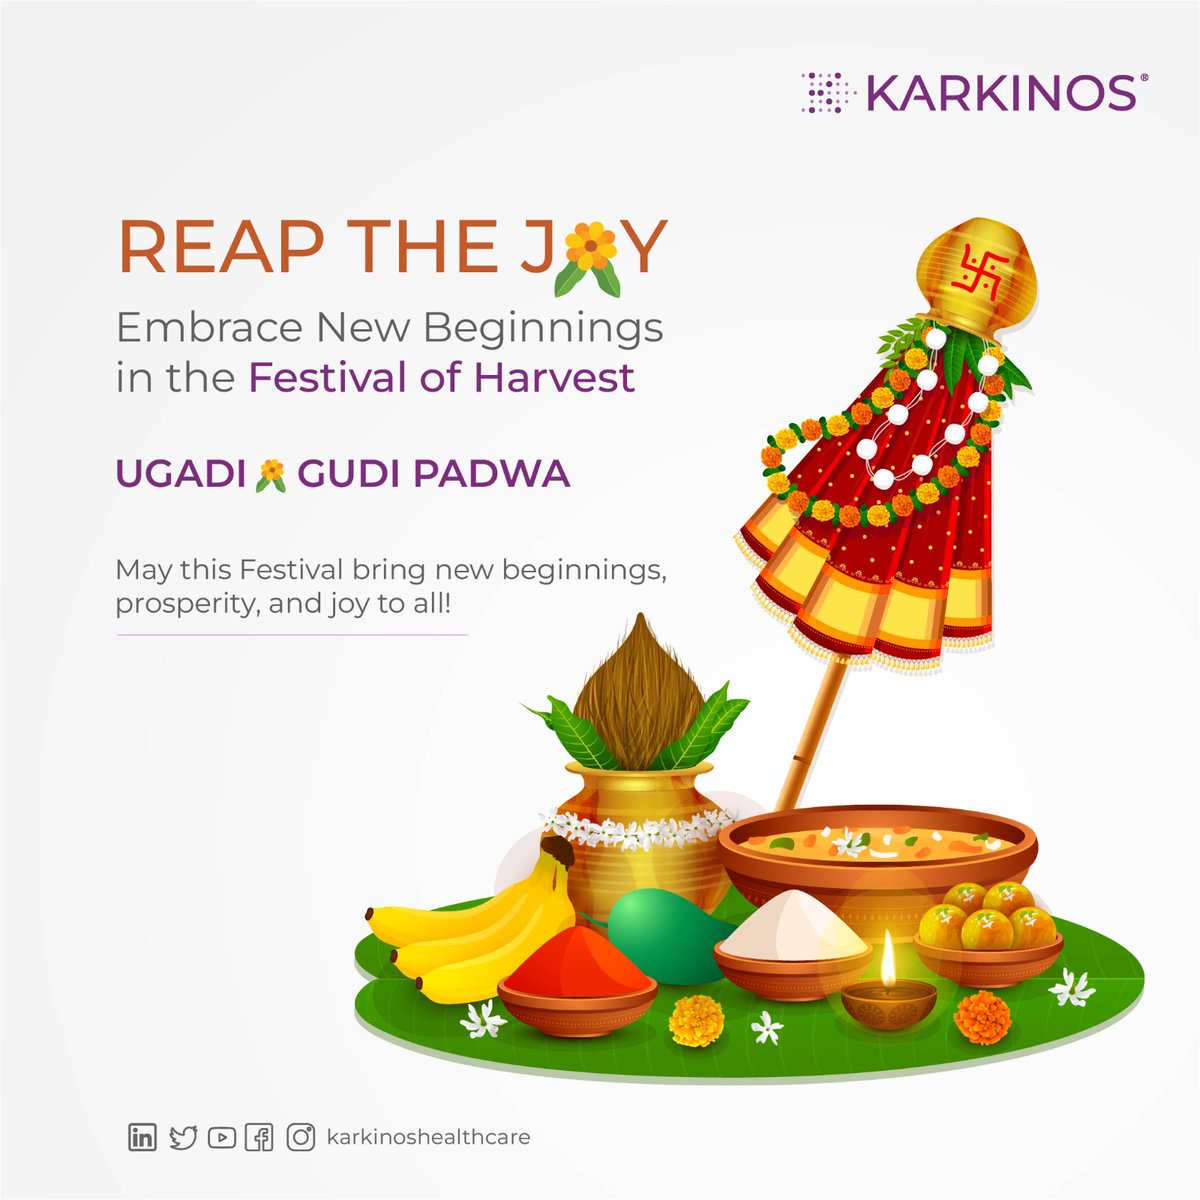 Embrace the spirit of abundance this Festival of Harvest with Karkinos Healthcare. Let's unite in our dedication to early cancer detection and compassionate care. Together, we sow seeds of hope for a future free of cancer's grip. #HappyUgadi #HappyGudiPadwa